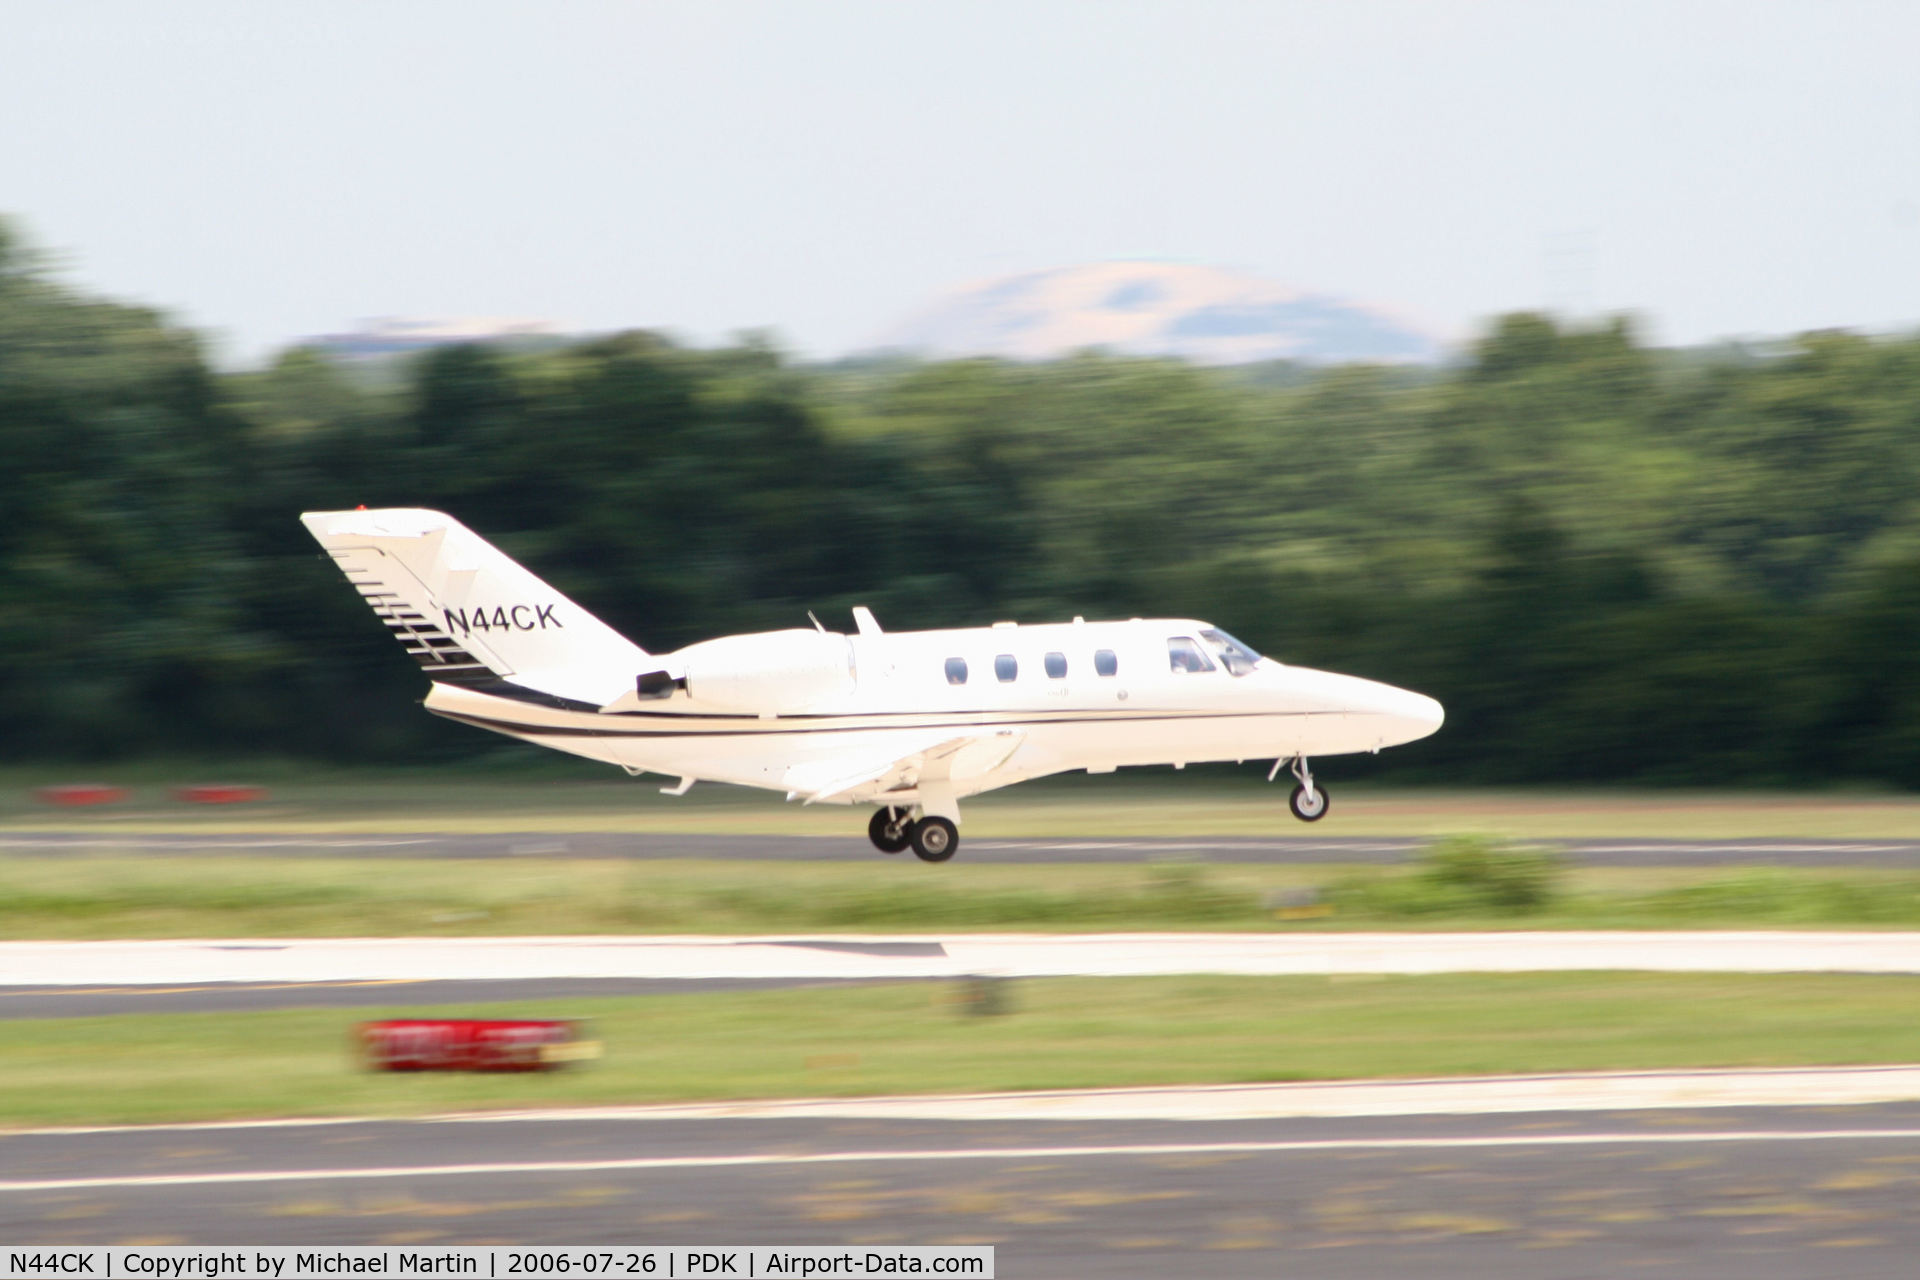 N44CK, 2000 Cessna 525 CitationJet CJ1 C/N 525-0401, Departing 20L enroute to GSO